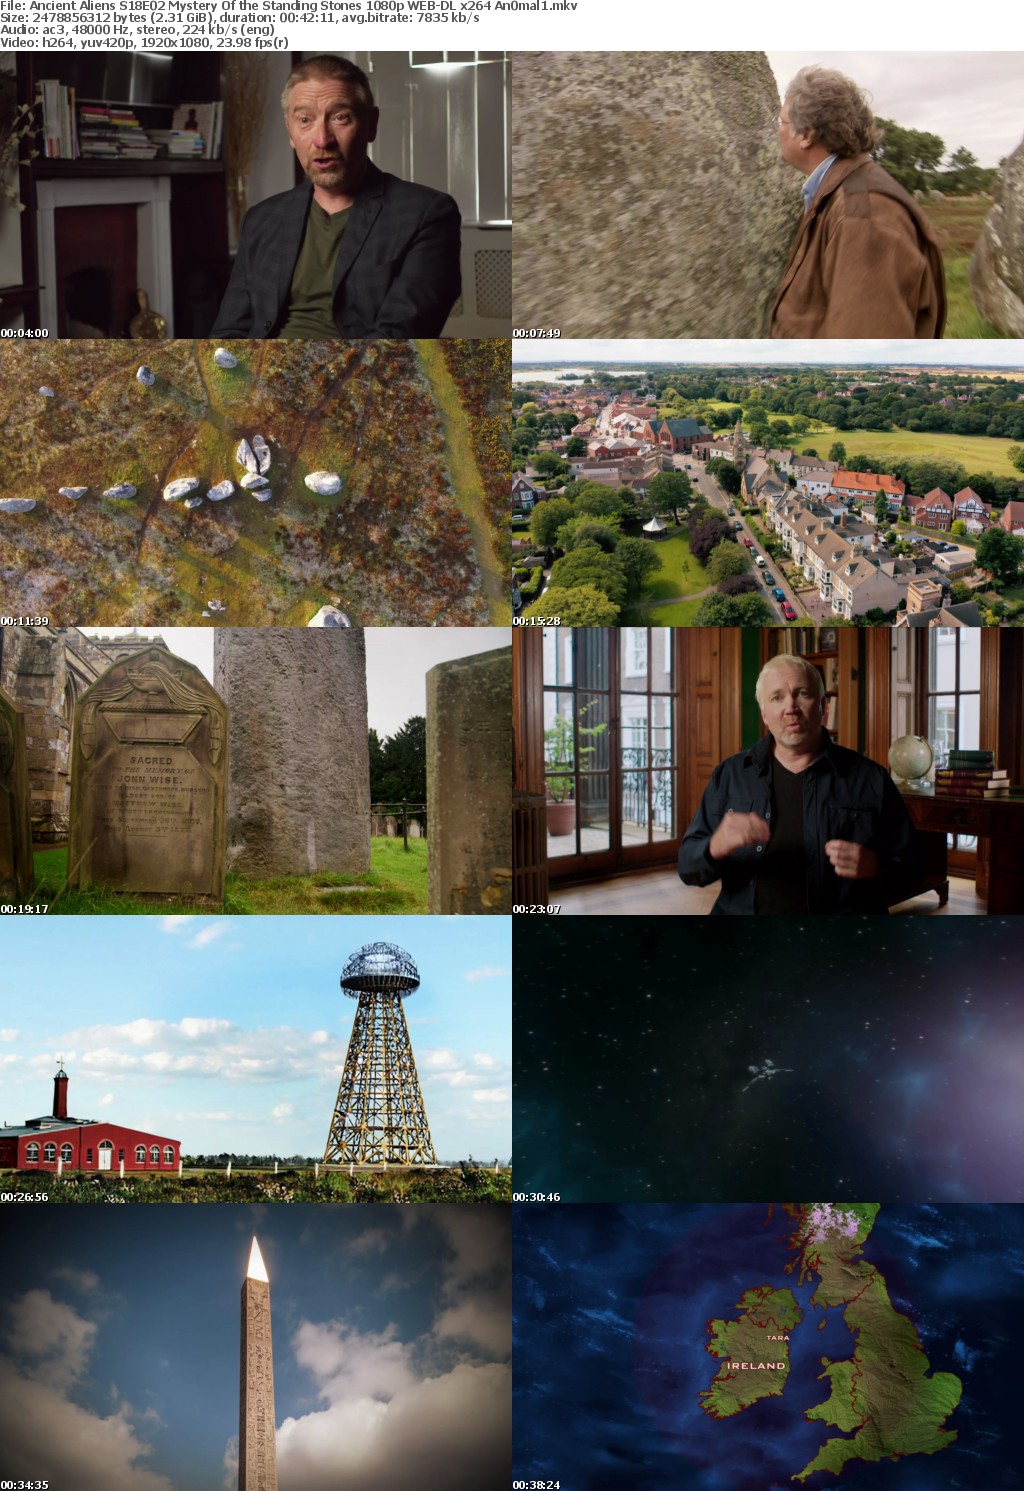 Ancient Aliens S18E02 Mystery Of the Standing Stones 1080p WEB-DL x264 An0mal1